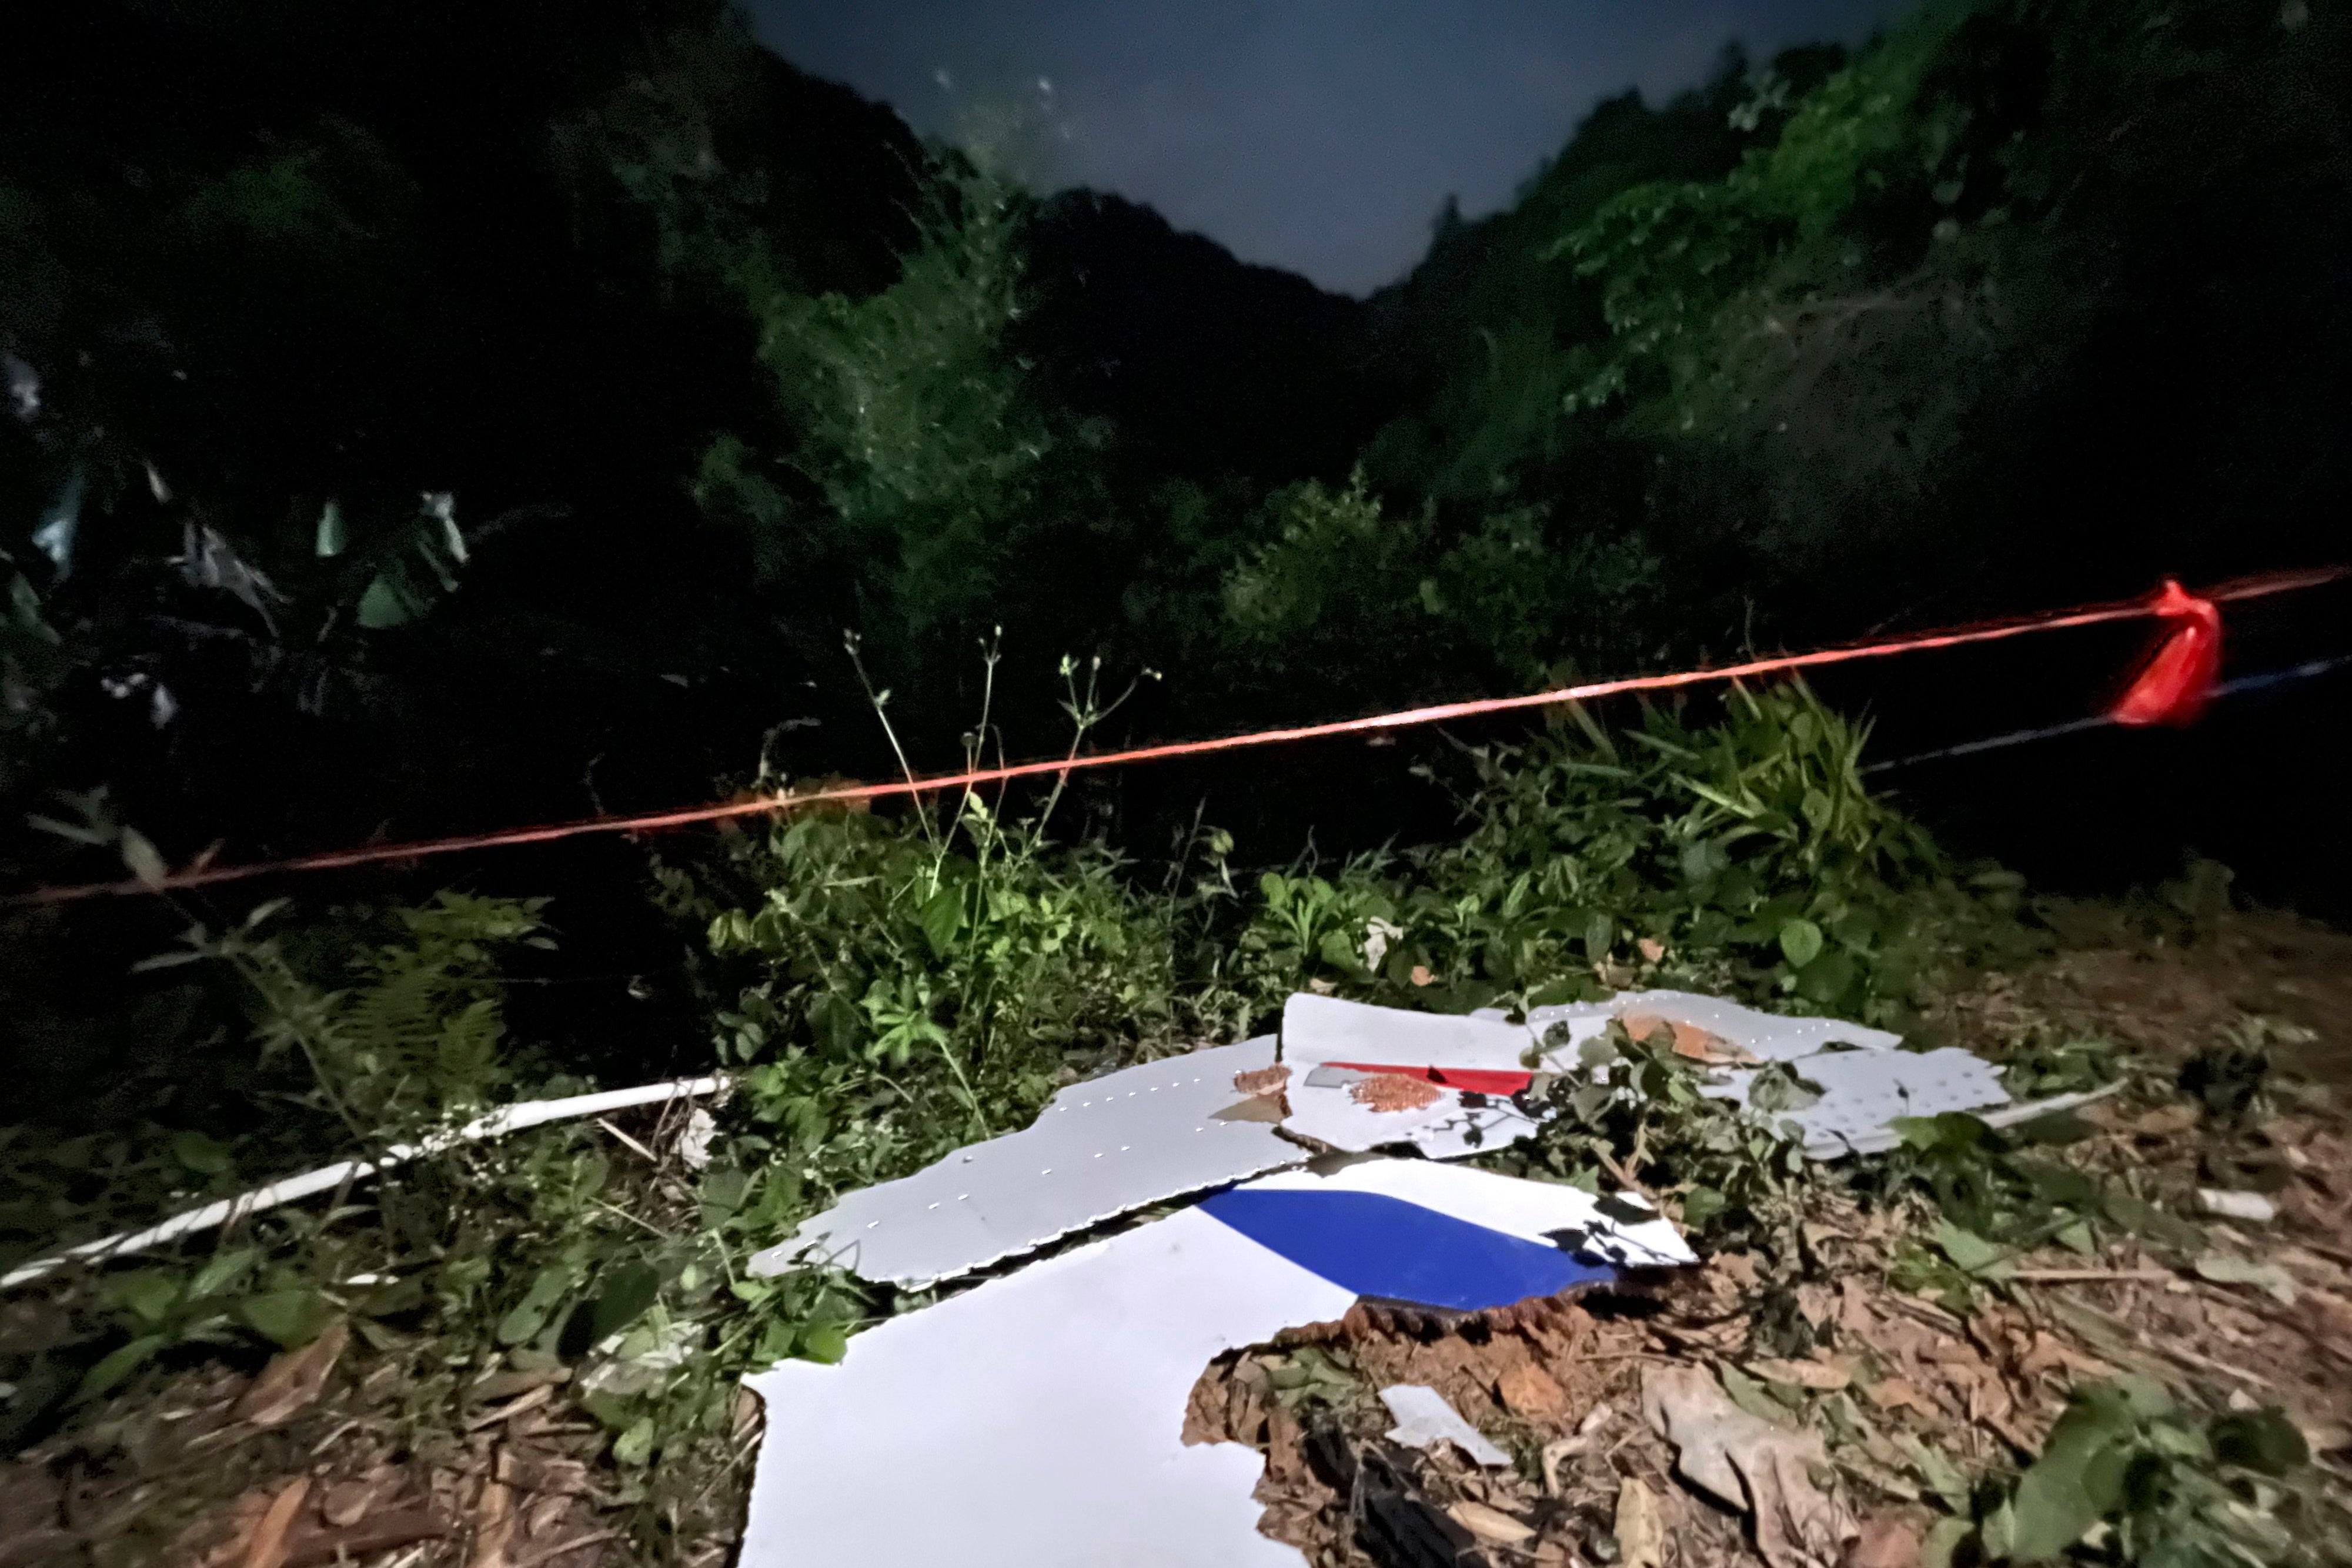 Debris is seen at the site of the plane crash in Tengxian County in southern China's Guangxi region